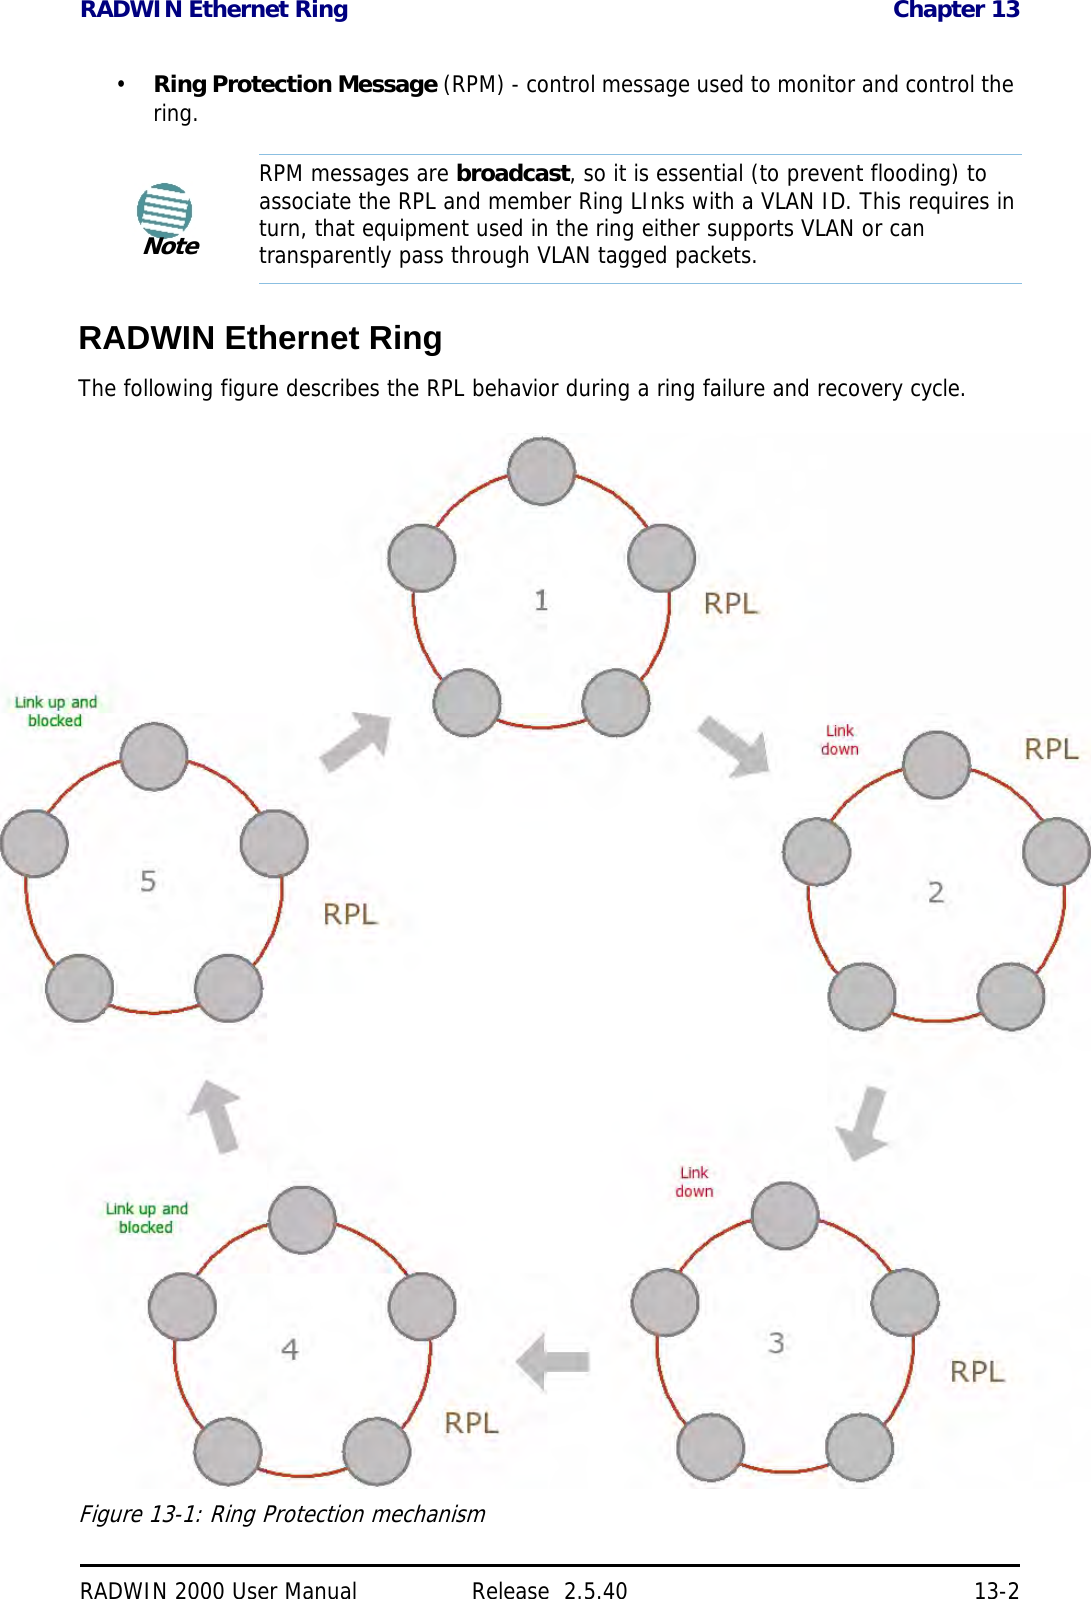 RADWIN Ethernet Ring Chapter 13RADWIN 2000 User Manual Release  2.5.40 13-2•Ring Protection Message (RPM) - control message used to monitor and control the ring.RADWIN Ethernet RingThe following figure describes the RPL behavior during a ring failure and recovery cycle.Figure 13-1: Ring Protection mechanismNoteRPM messages are broadcast, so it is essential (to prevent flooding) to associate the RPL and member Ring LInks with a VLAN ID. This requires in turn, that equipment used in the ring either supports VLAN or can transparently pass through VLAN tagged packets.